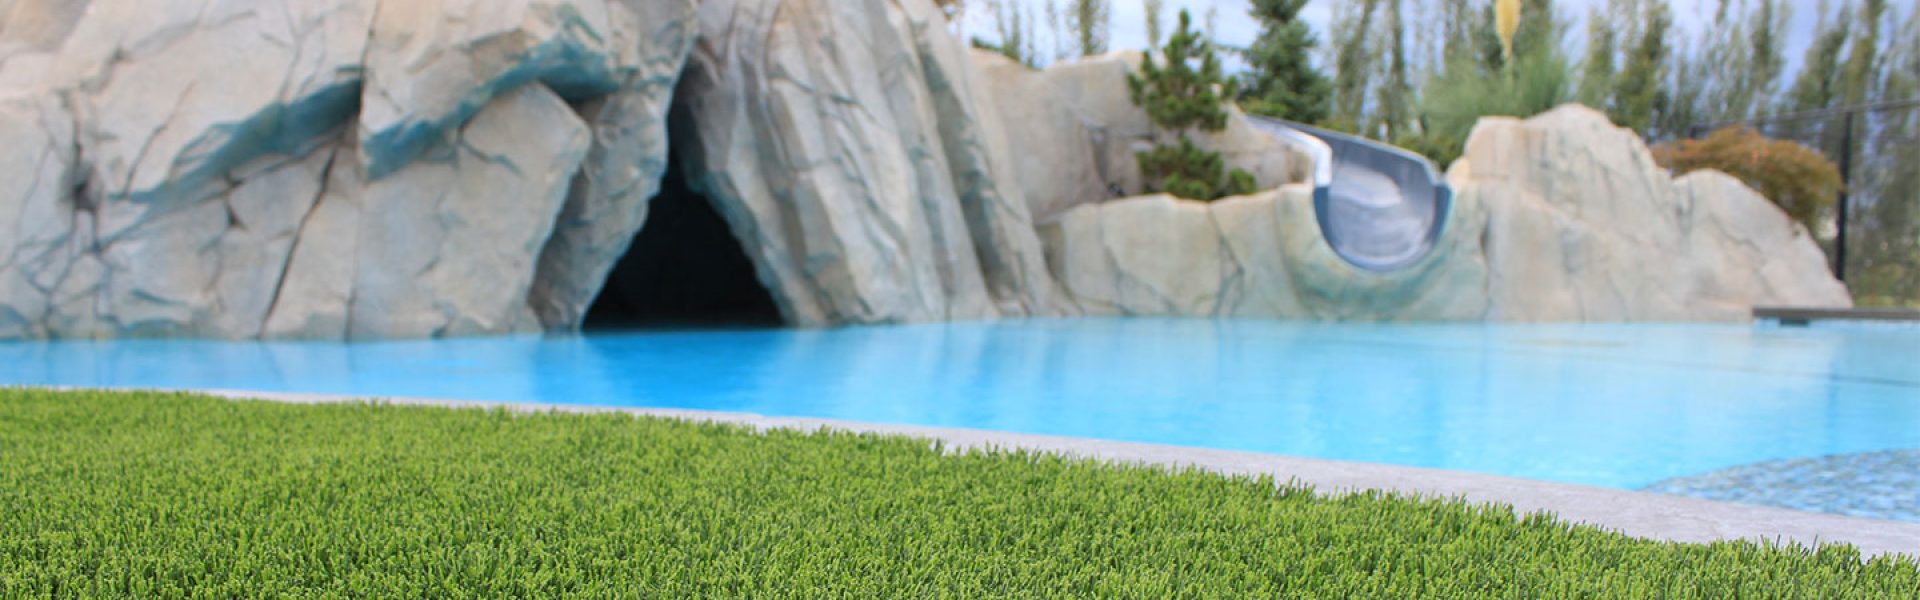 artificial grass by pool